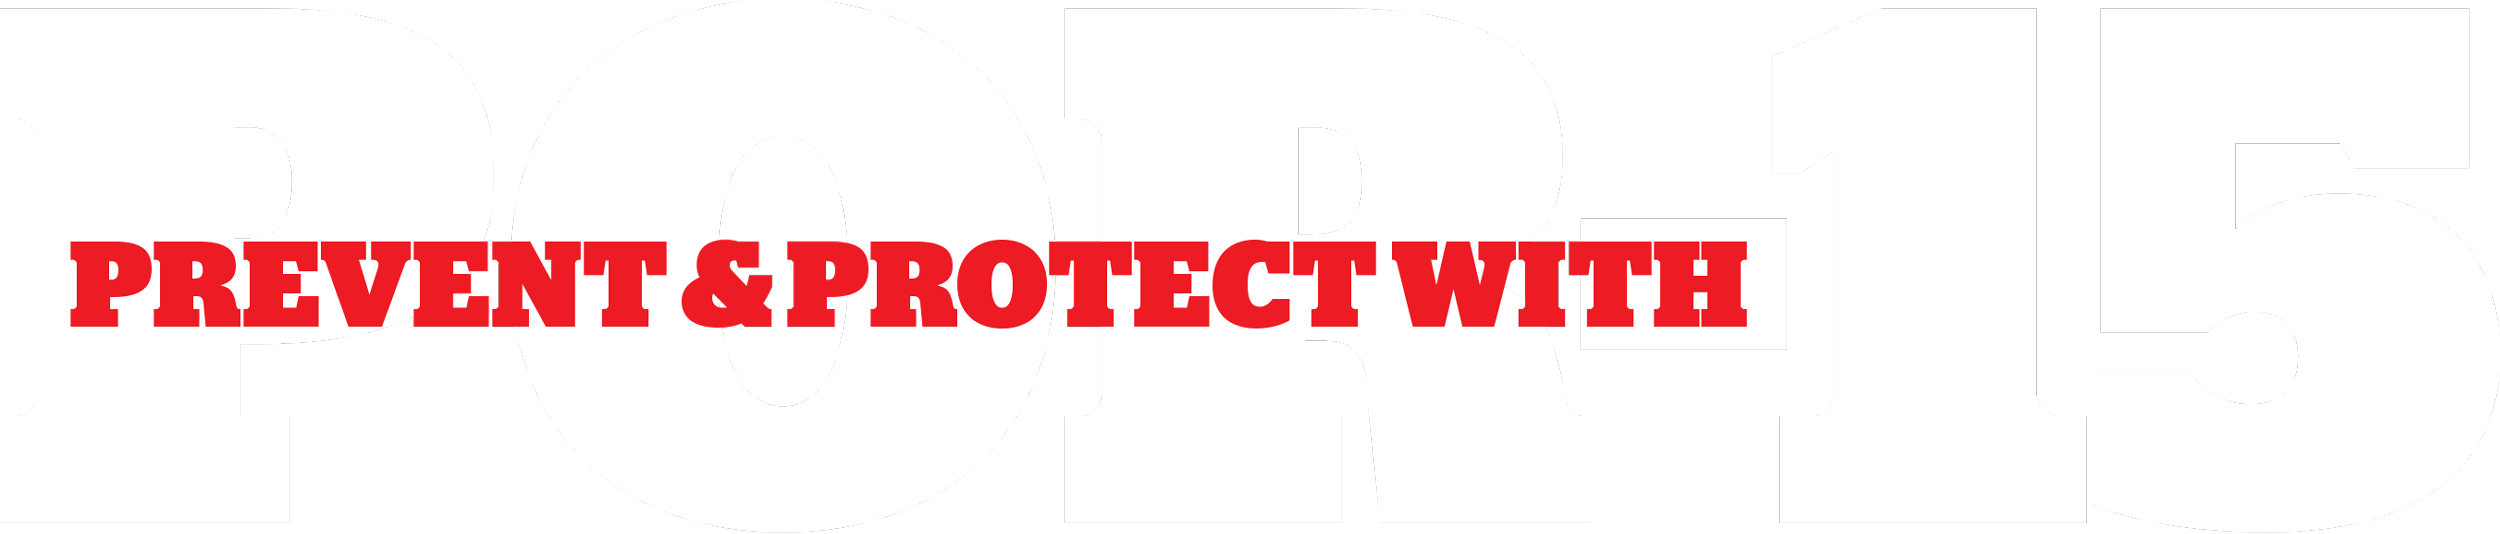 Prevent & Protect With Por-15 title image